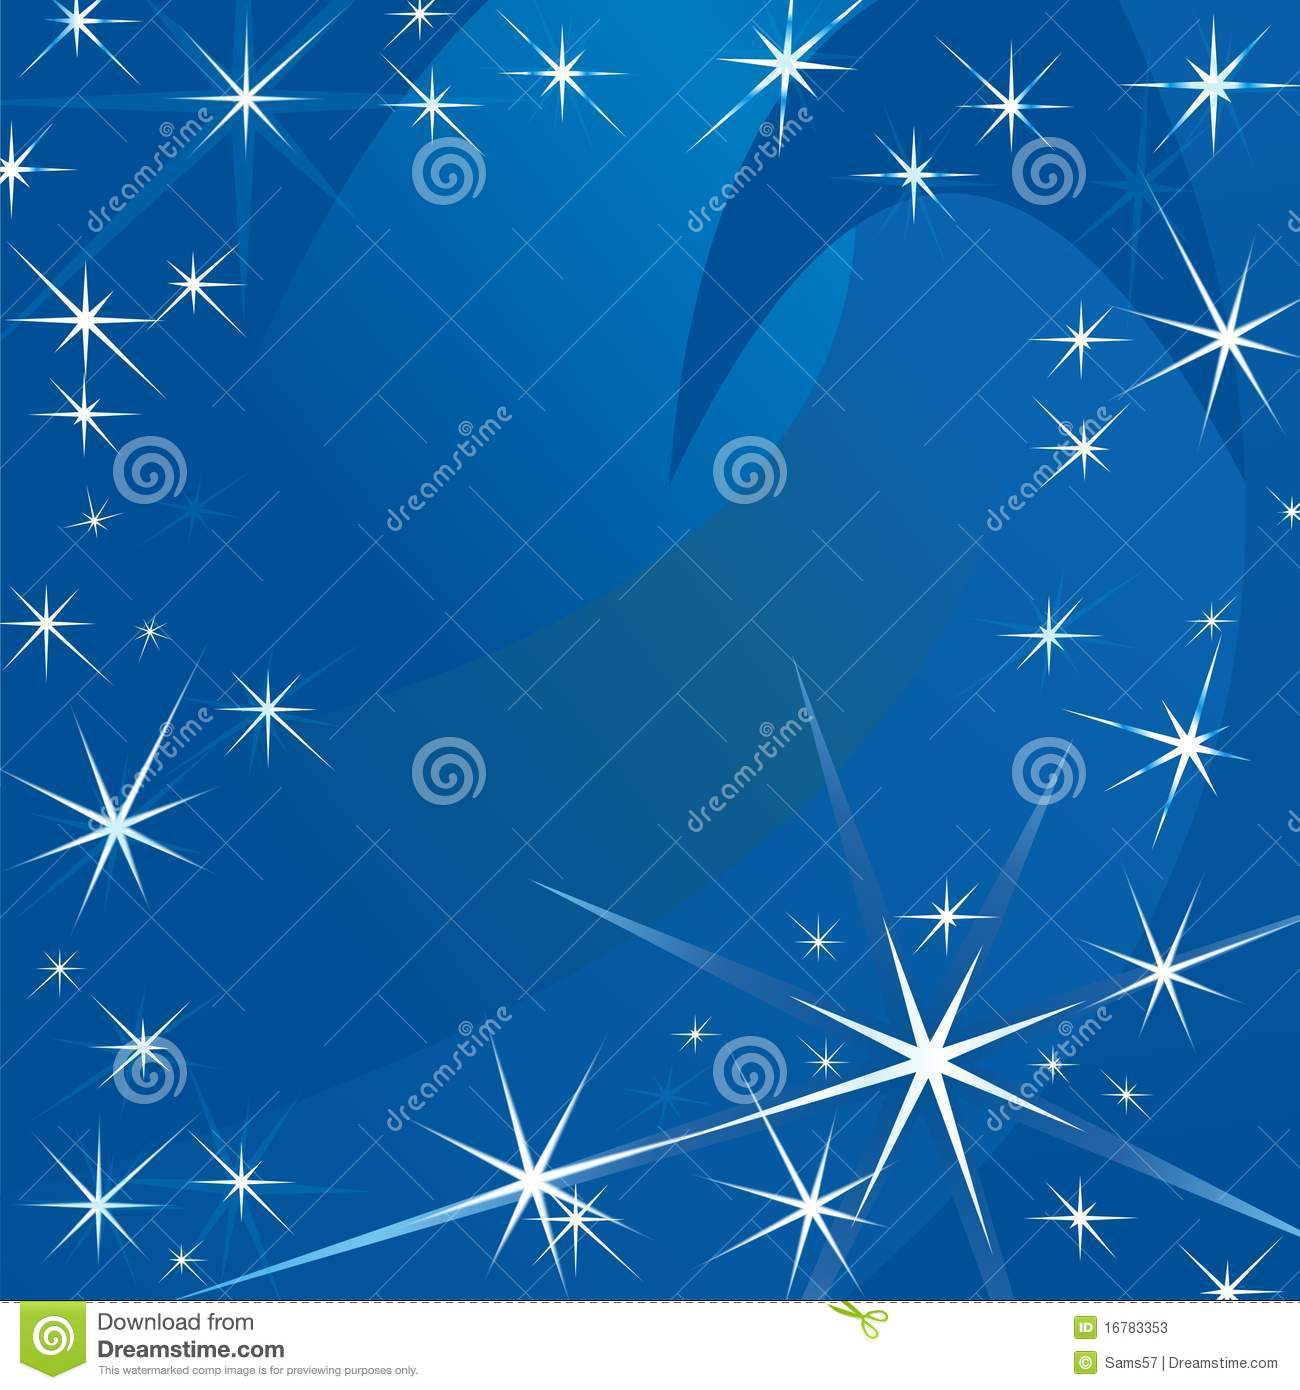 Abstract Vector Backgrounds with Stars